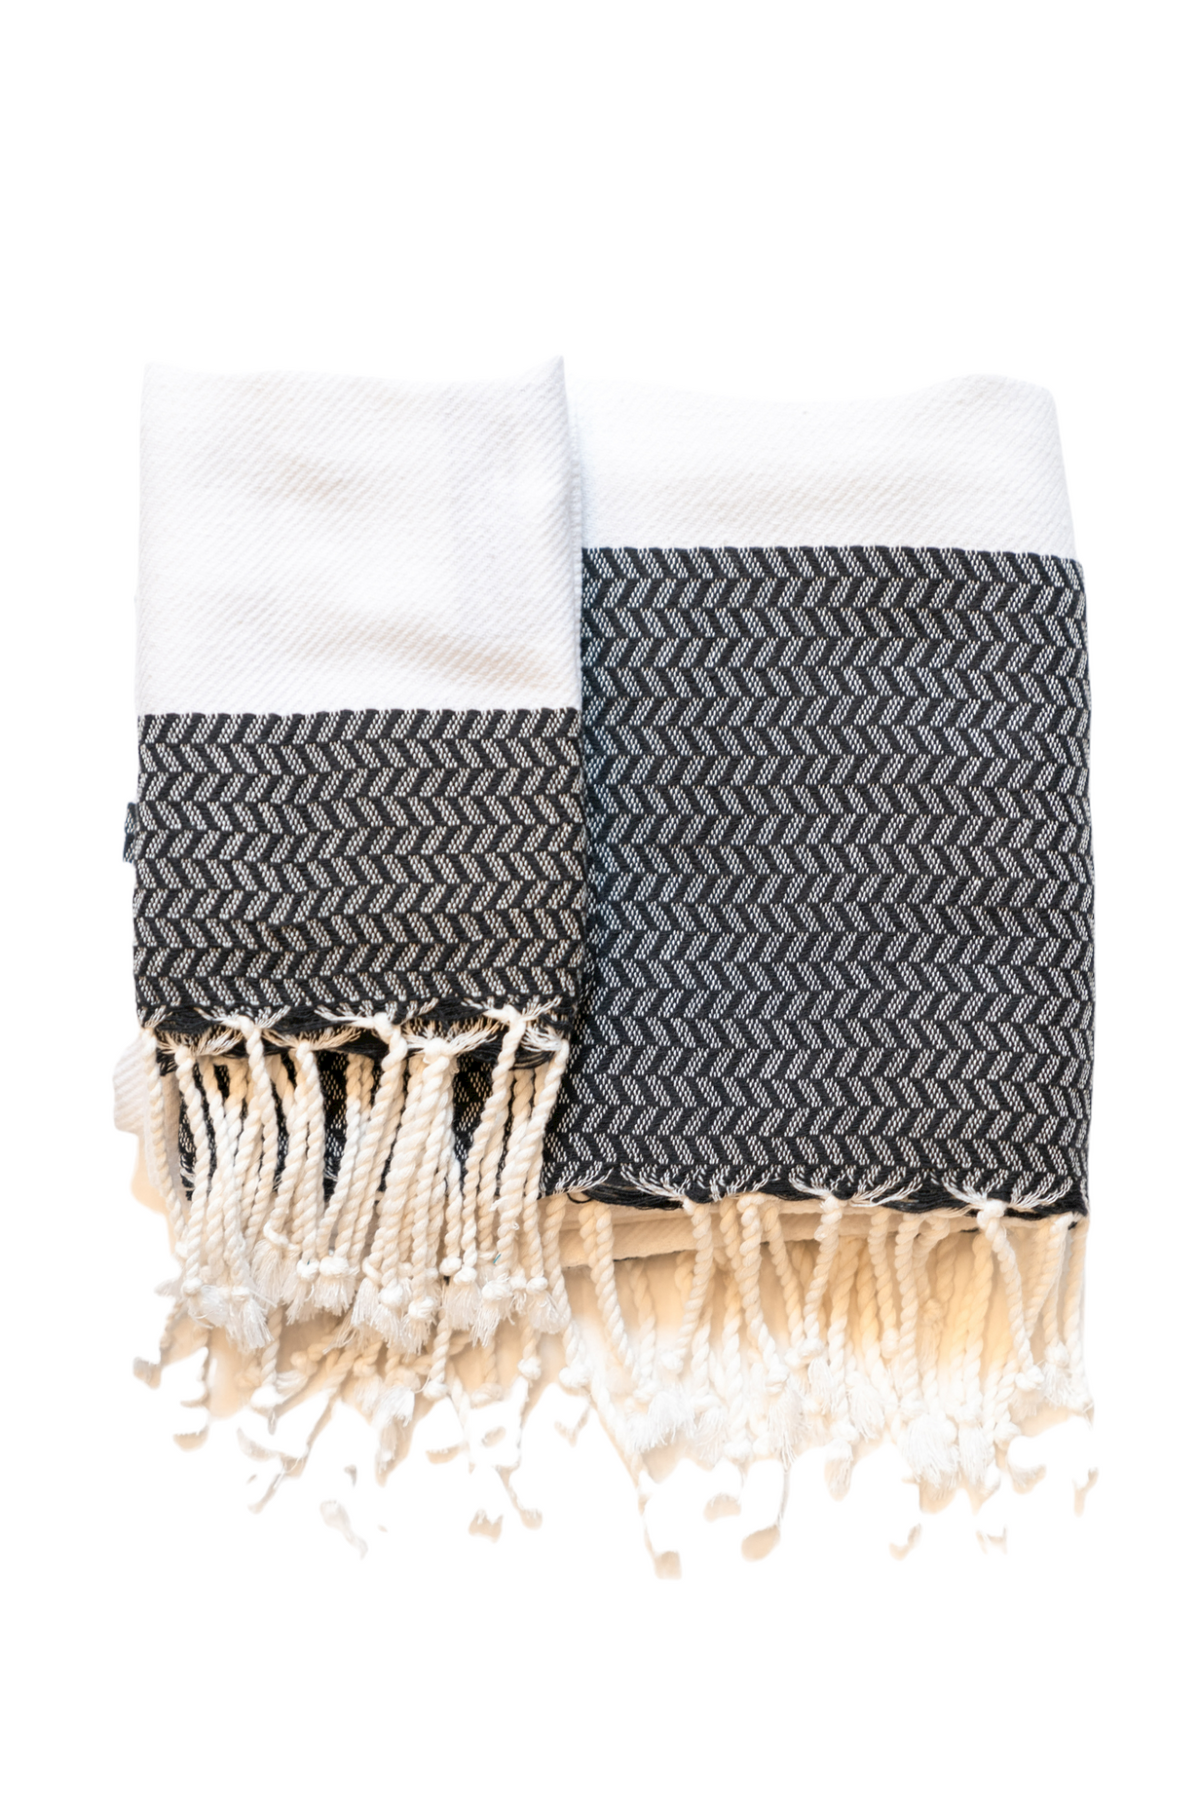 Hand-towel FOUTA: White with Charcoal stripe — Fouta Colors